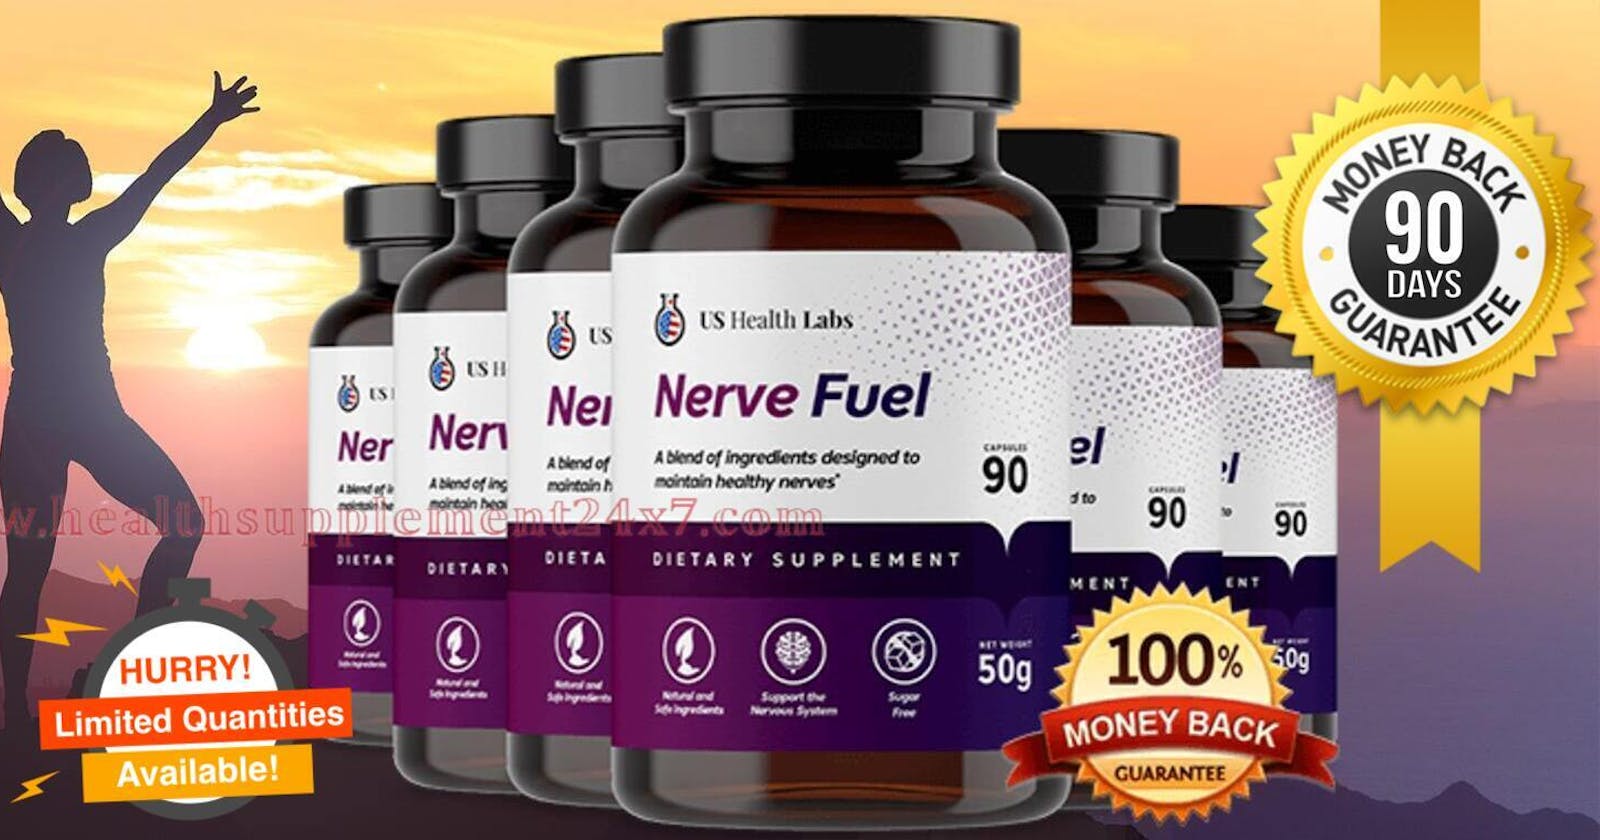 Nerve Fuel {US Health Labs} Protecting and Strengthening Nervous System(Spam Or Legit)